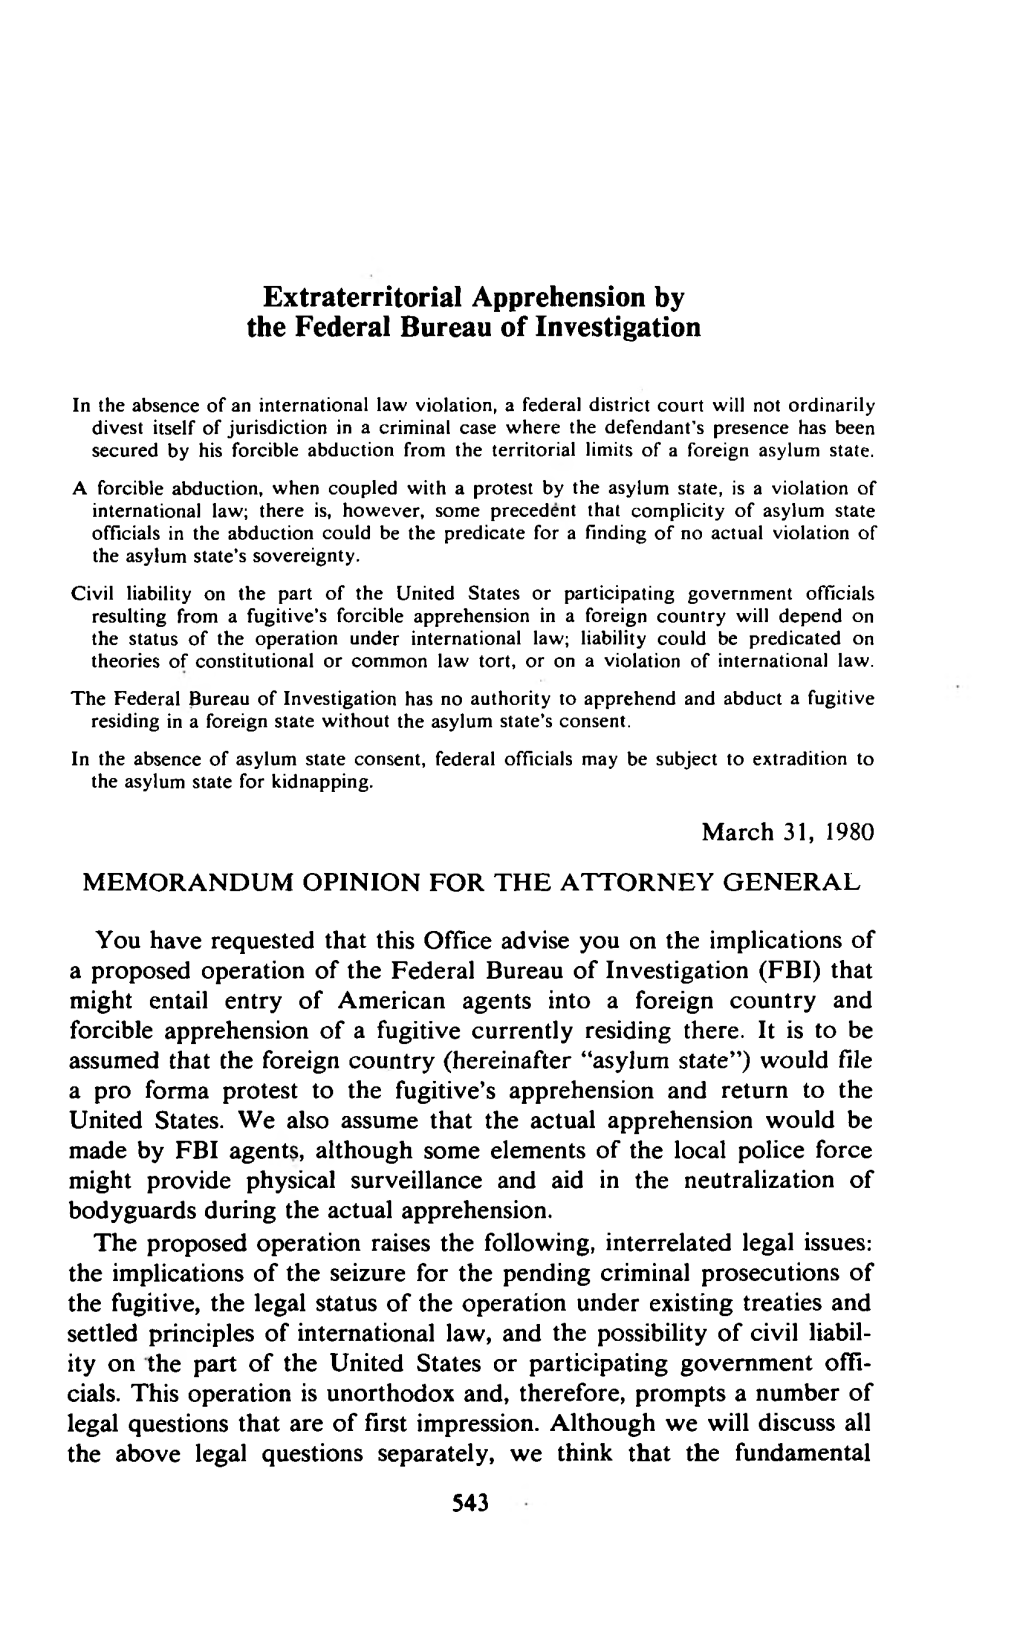 Extraterritorial Apprehension by the Federal Bureau of Investigation